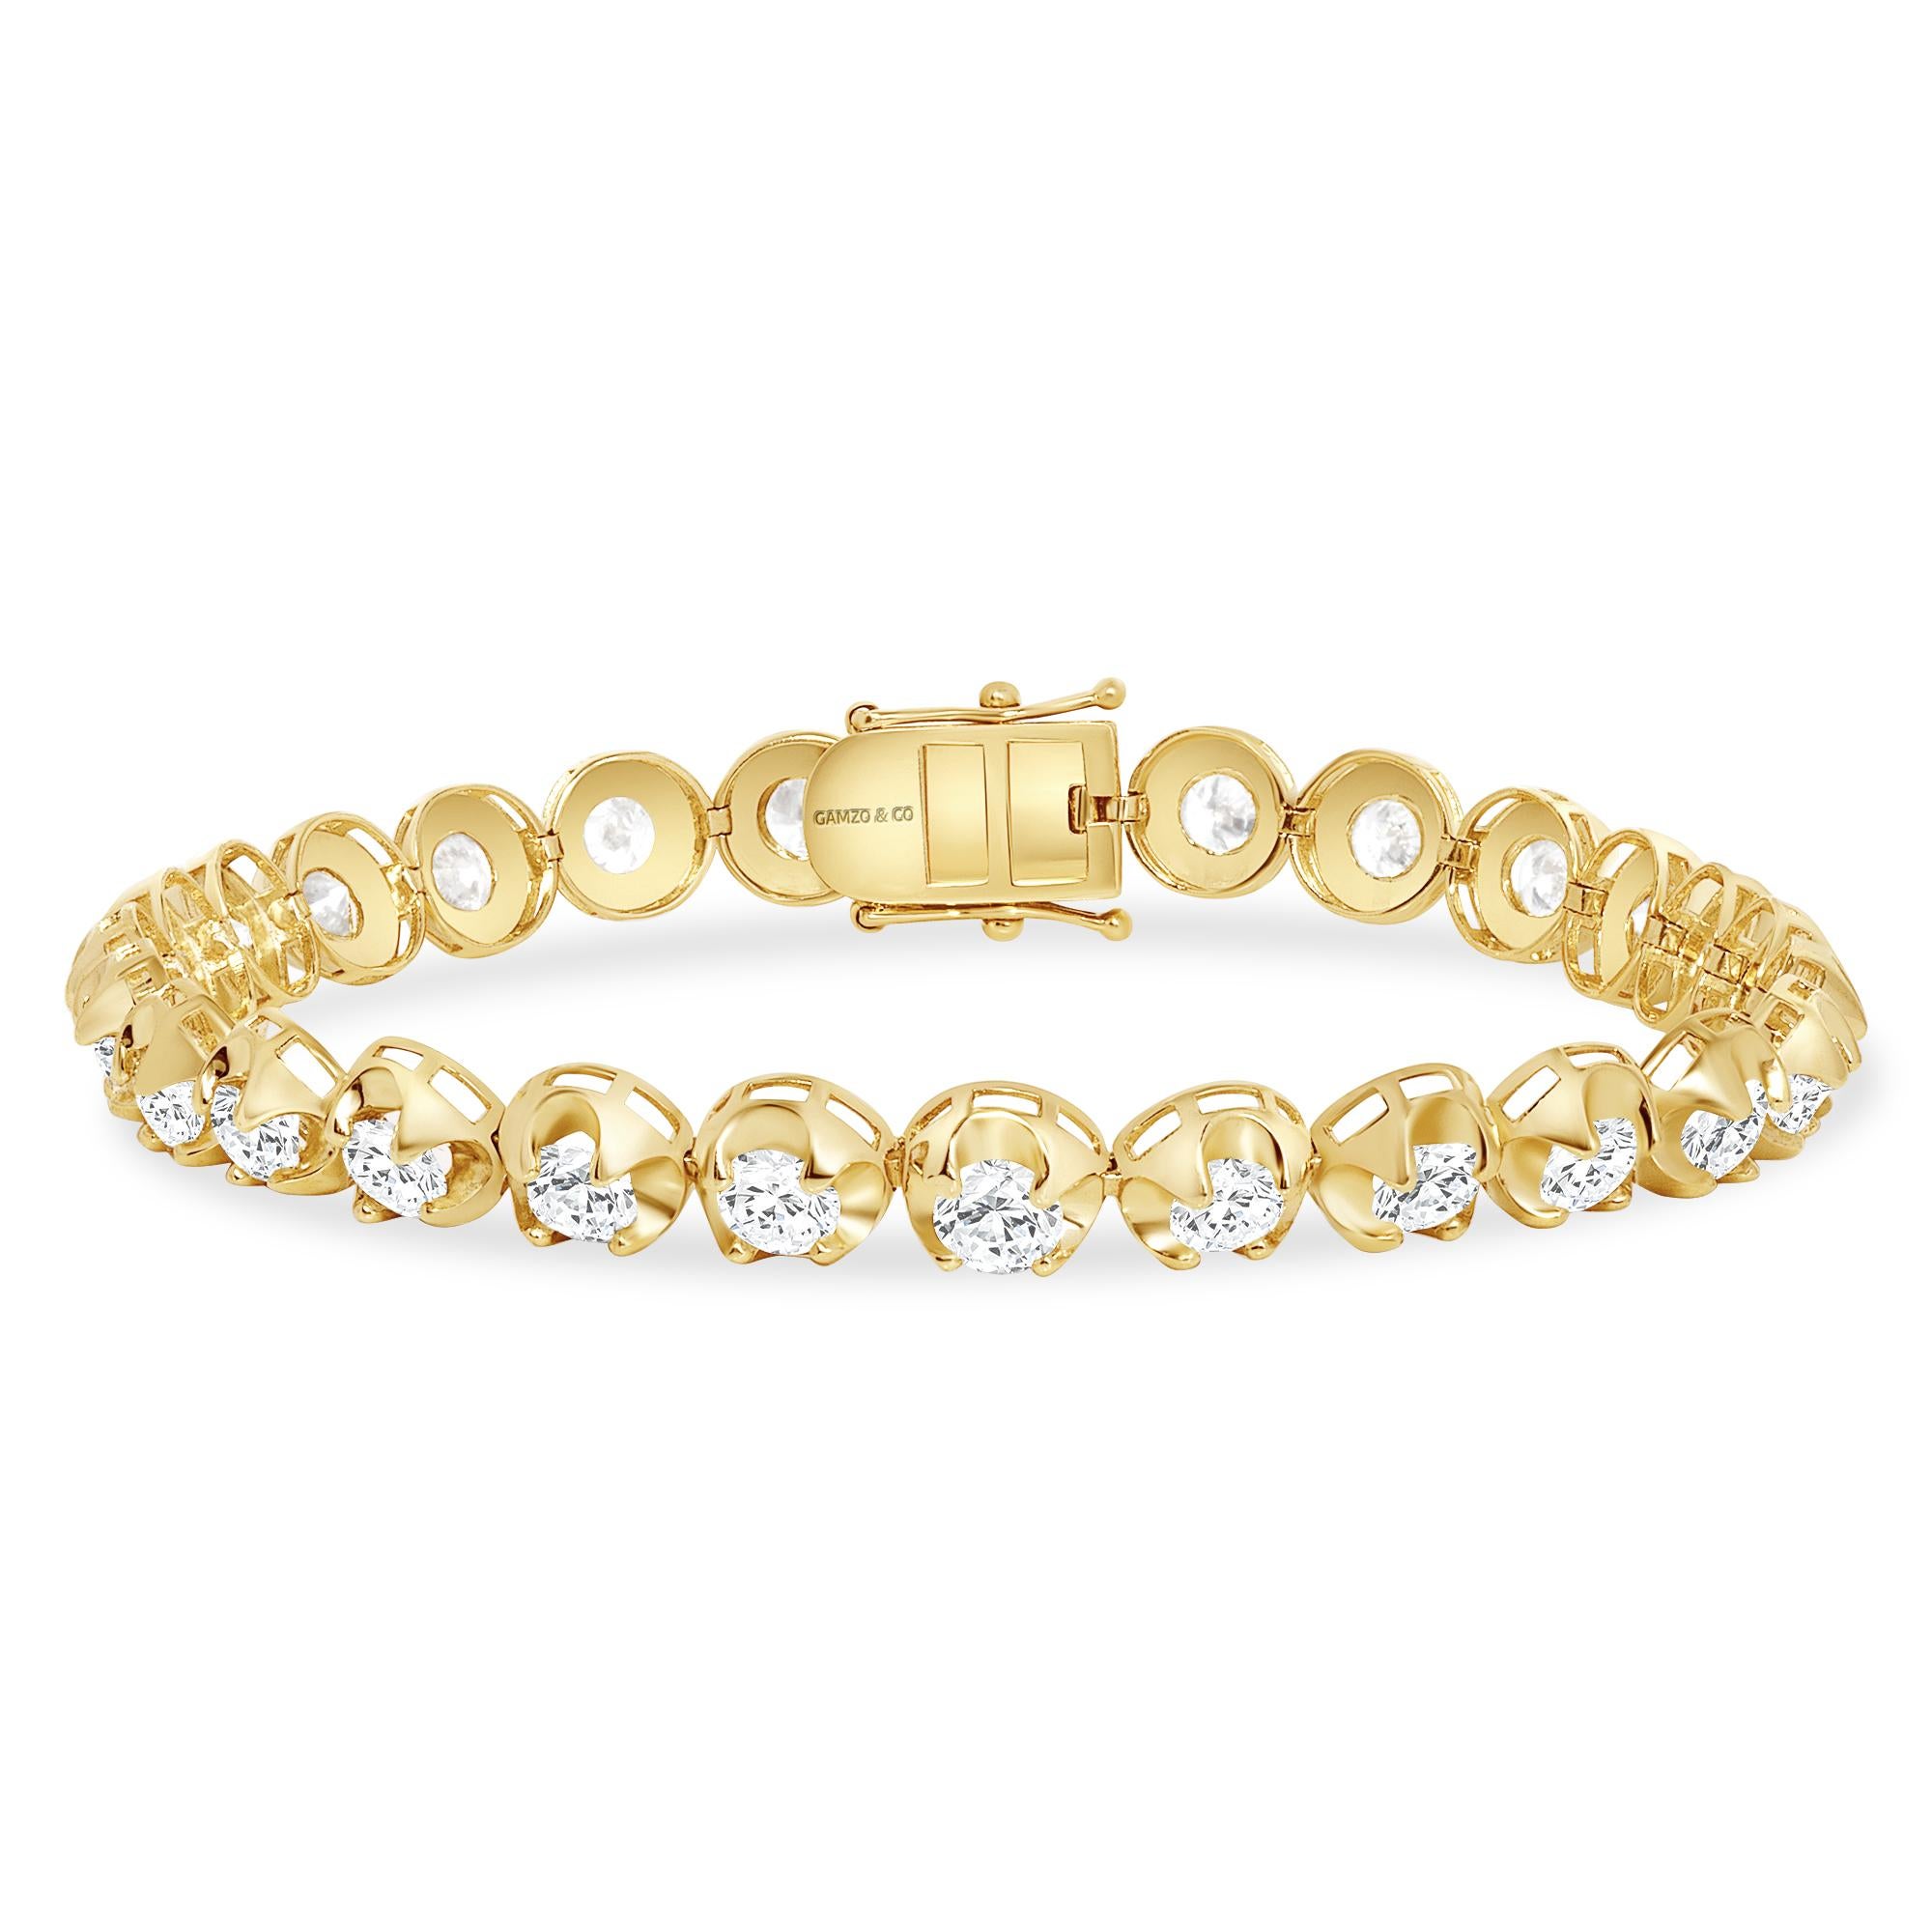 These beautiful round diamonds dance around your wrist as they absorb light and attention.
Metal: 14k Gold
Diamond Cut: Round
Diamond Total Carats: 7ct
Diamond Clarity: VS
Diamond Color: F
Color: Yellow Gold
Bracelet Length: 7.5 Inches 
Included